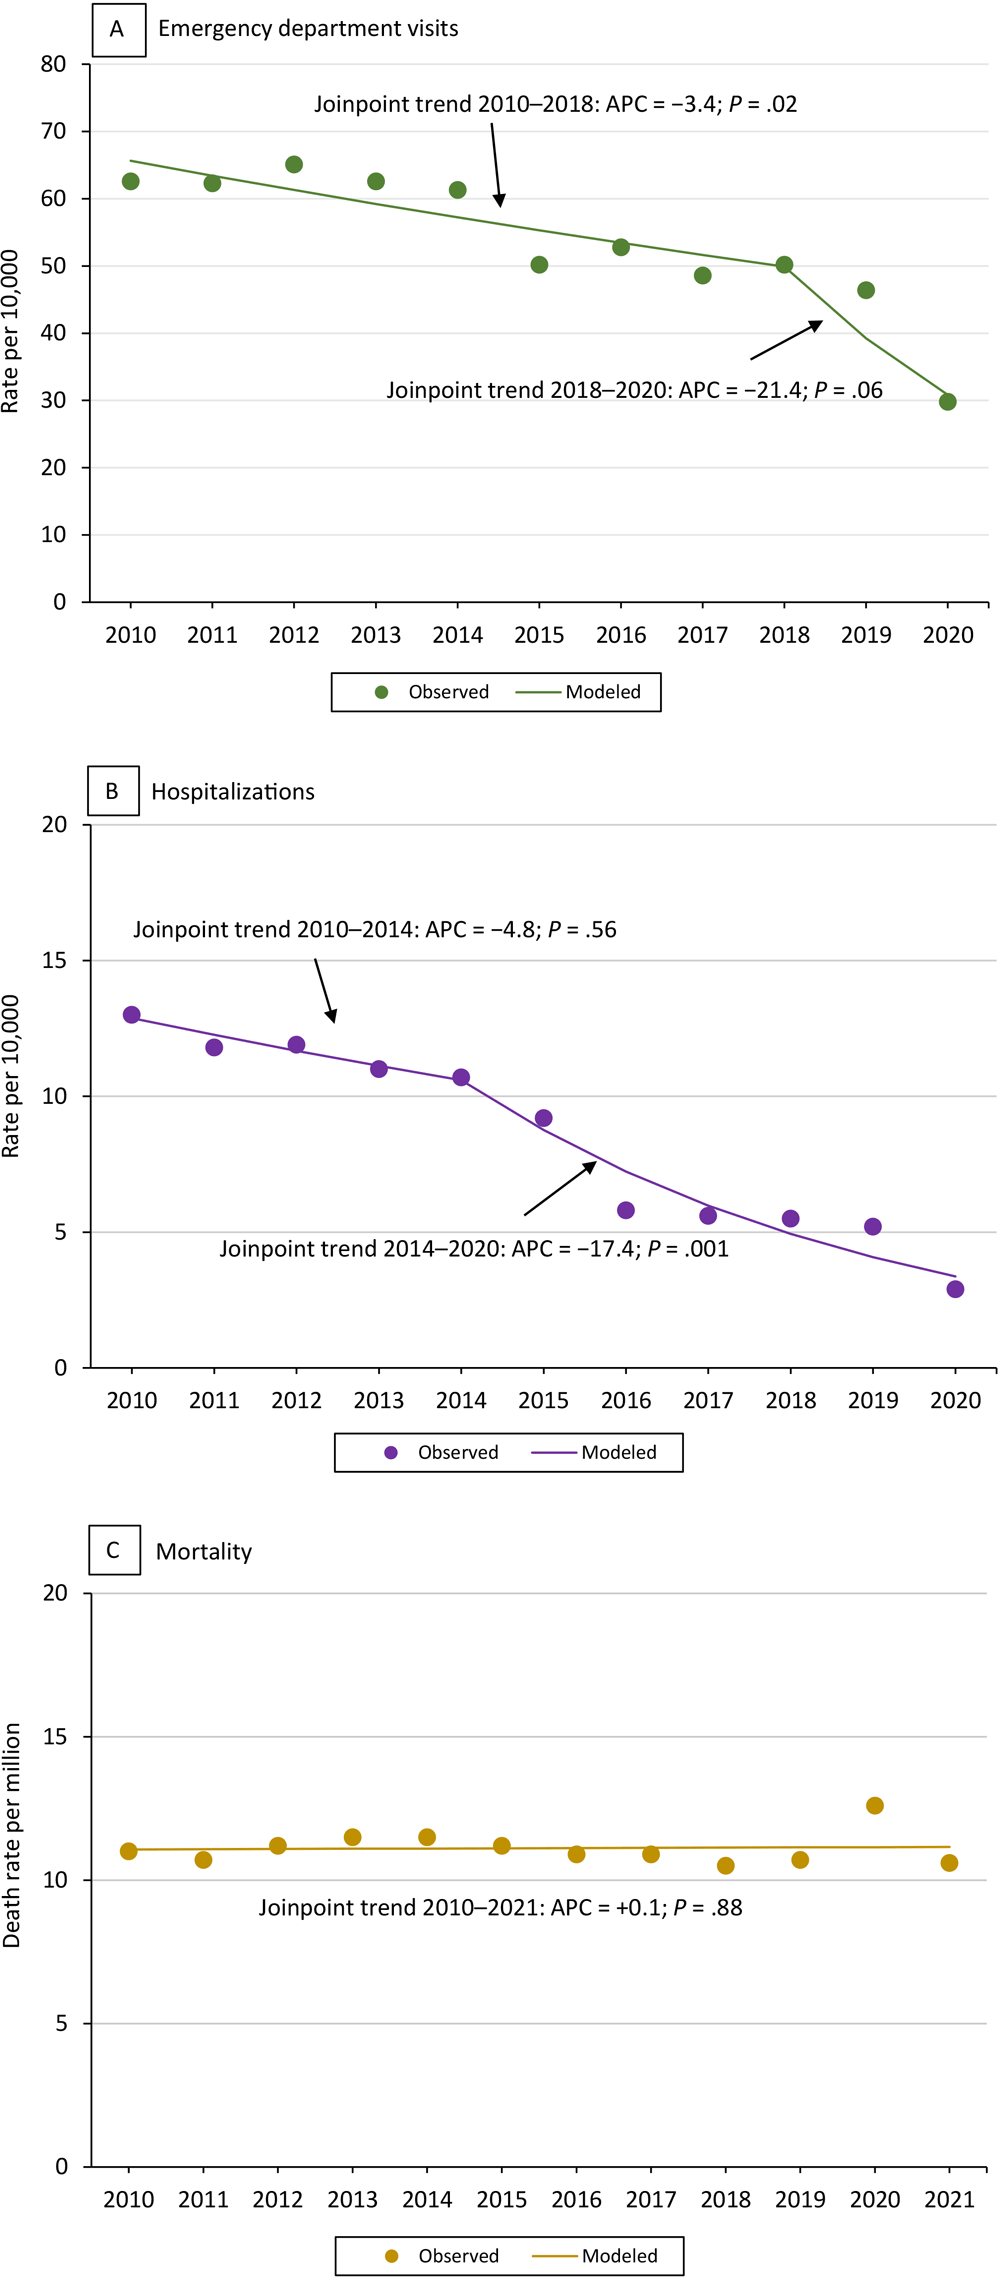 Asthma-related health care use and death rate among all ages by year. The P value of trend line slope is significant at .05. The trend line is based on estimates from the statistical model and observed prevalence estimates (estimates as is from the survey data) (dots). The trend slopes are numbered (slope 1, slope 2) when there is more than 1 significant trend line, as in the current asthma trend lines. The health care use rate is shown as the number of hospitalizations and emergency department visits per the US Census resident population for the given year. Data sources: asthma emergency department visits and hospitalizations: Healthcare Cost and Utilization Project, National (Nationwide) Inpatient Sample (16) and National (Nationwide) Emergency Department Sample (15), Agency for Healthcare Research and Quality. Asthma deaths: CDC Wonder (Wide-Ranging Online Data for Epidemiologic Research) (17).